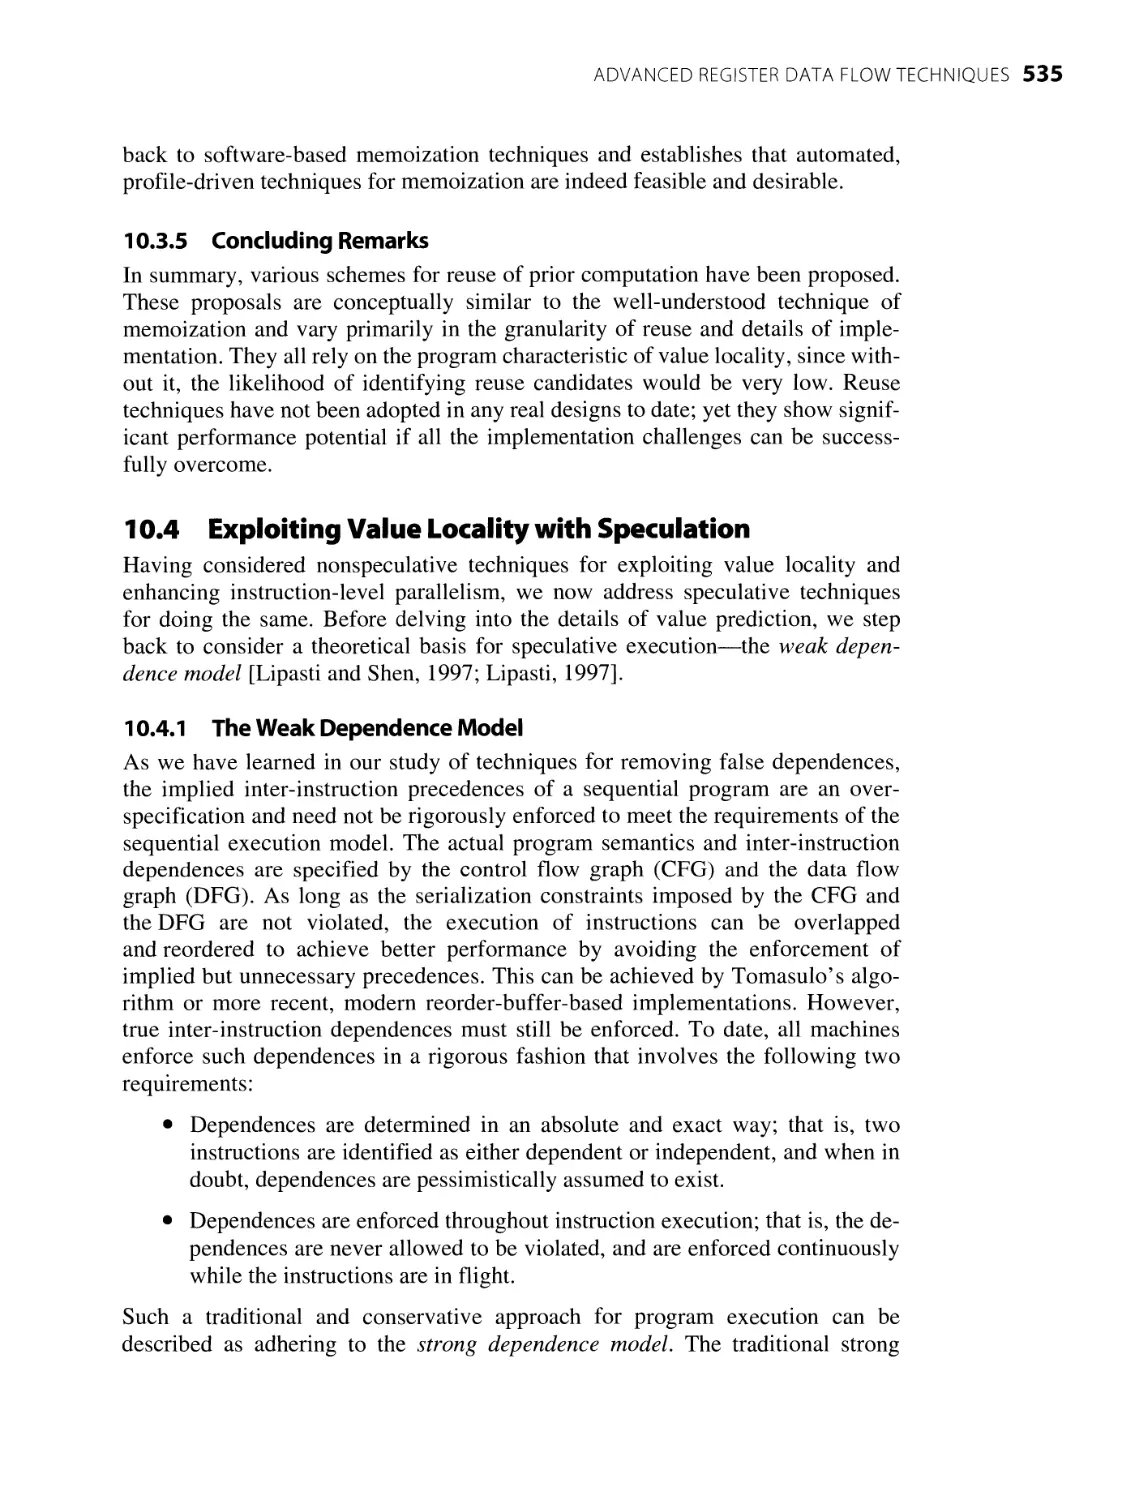 10.3.5 Concluding Remarks
10.4 Exploiting Value Locality with Speculation
10.4.1 The Weak Dependence Model